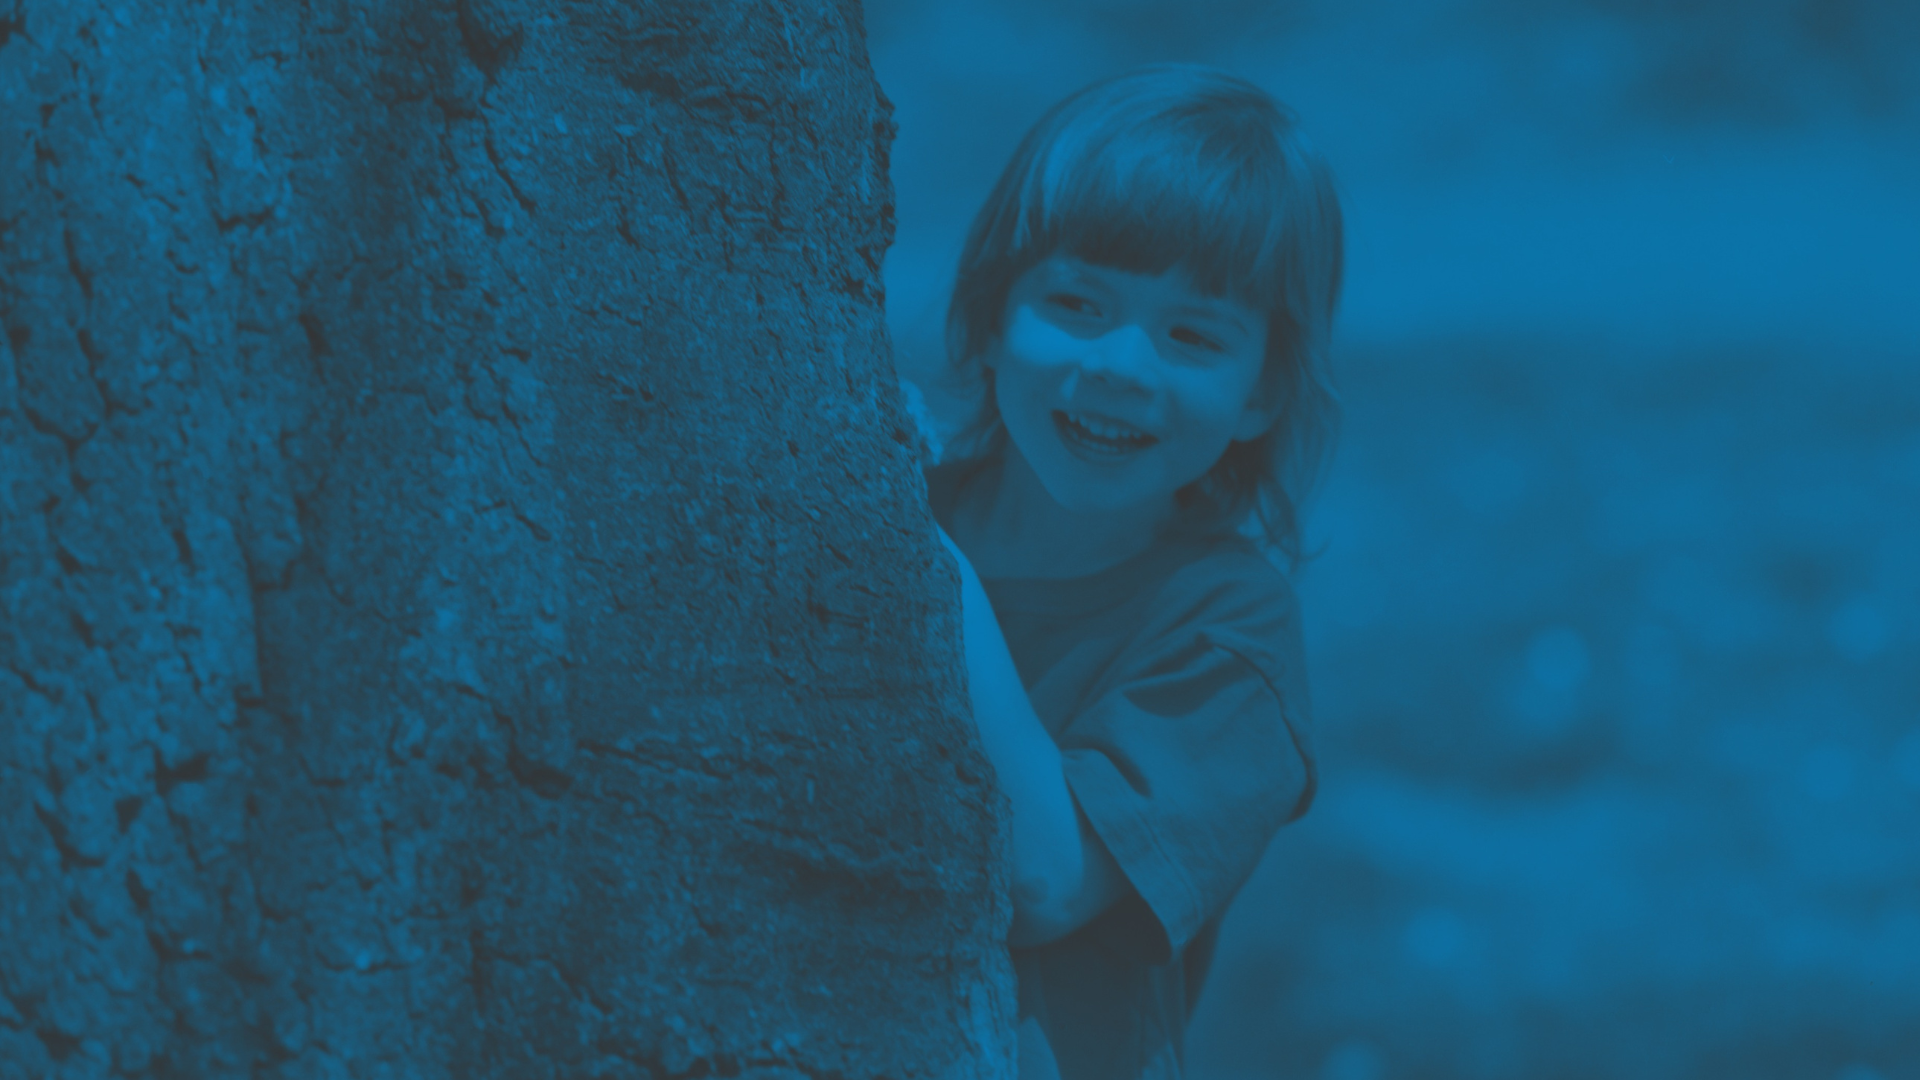 Image of a child playing near a tree in an outside setting - Schools within the UK can apply for grants for community-led tree-planting projects